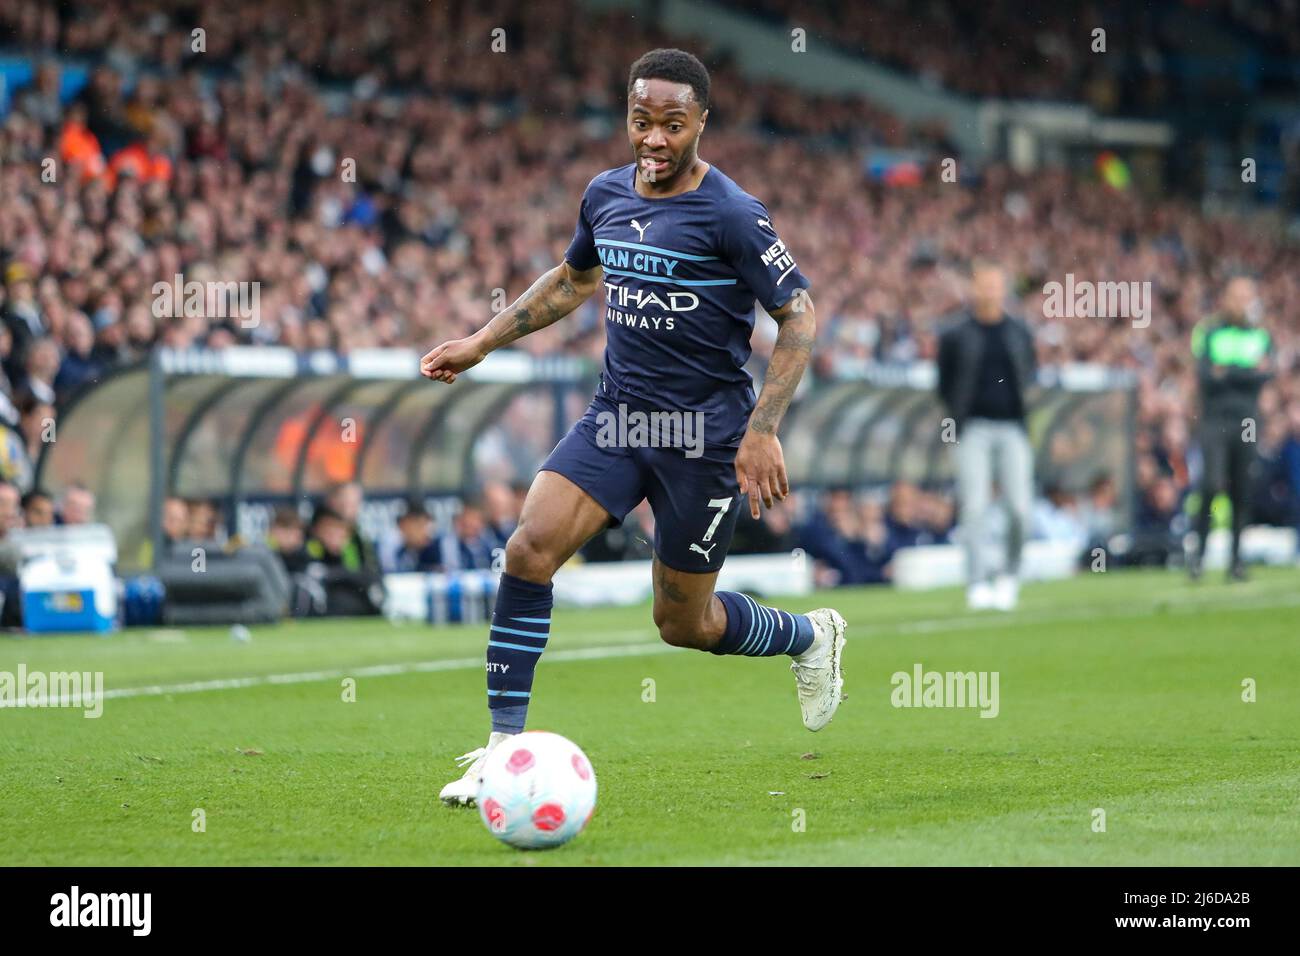 Raheem Sterling #7 of Manchester City on the ball during the game Stock Photo